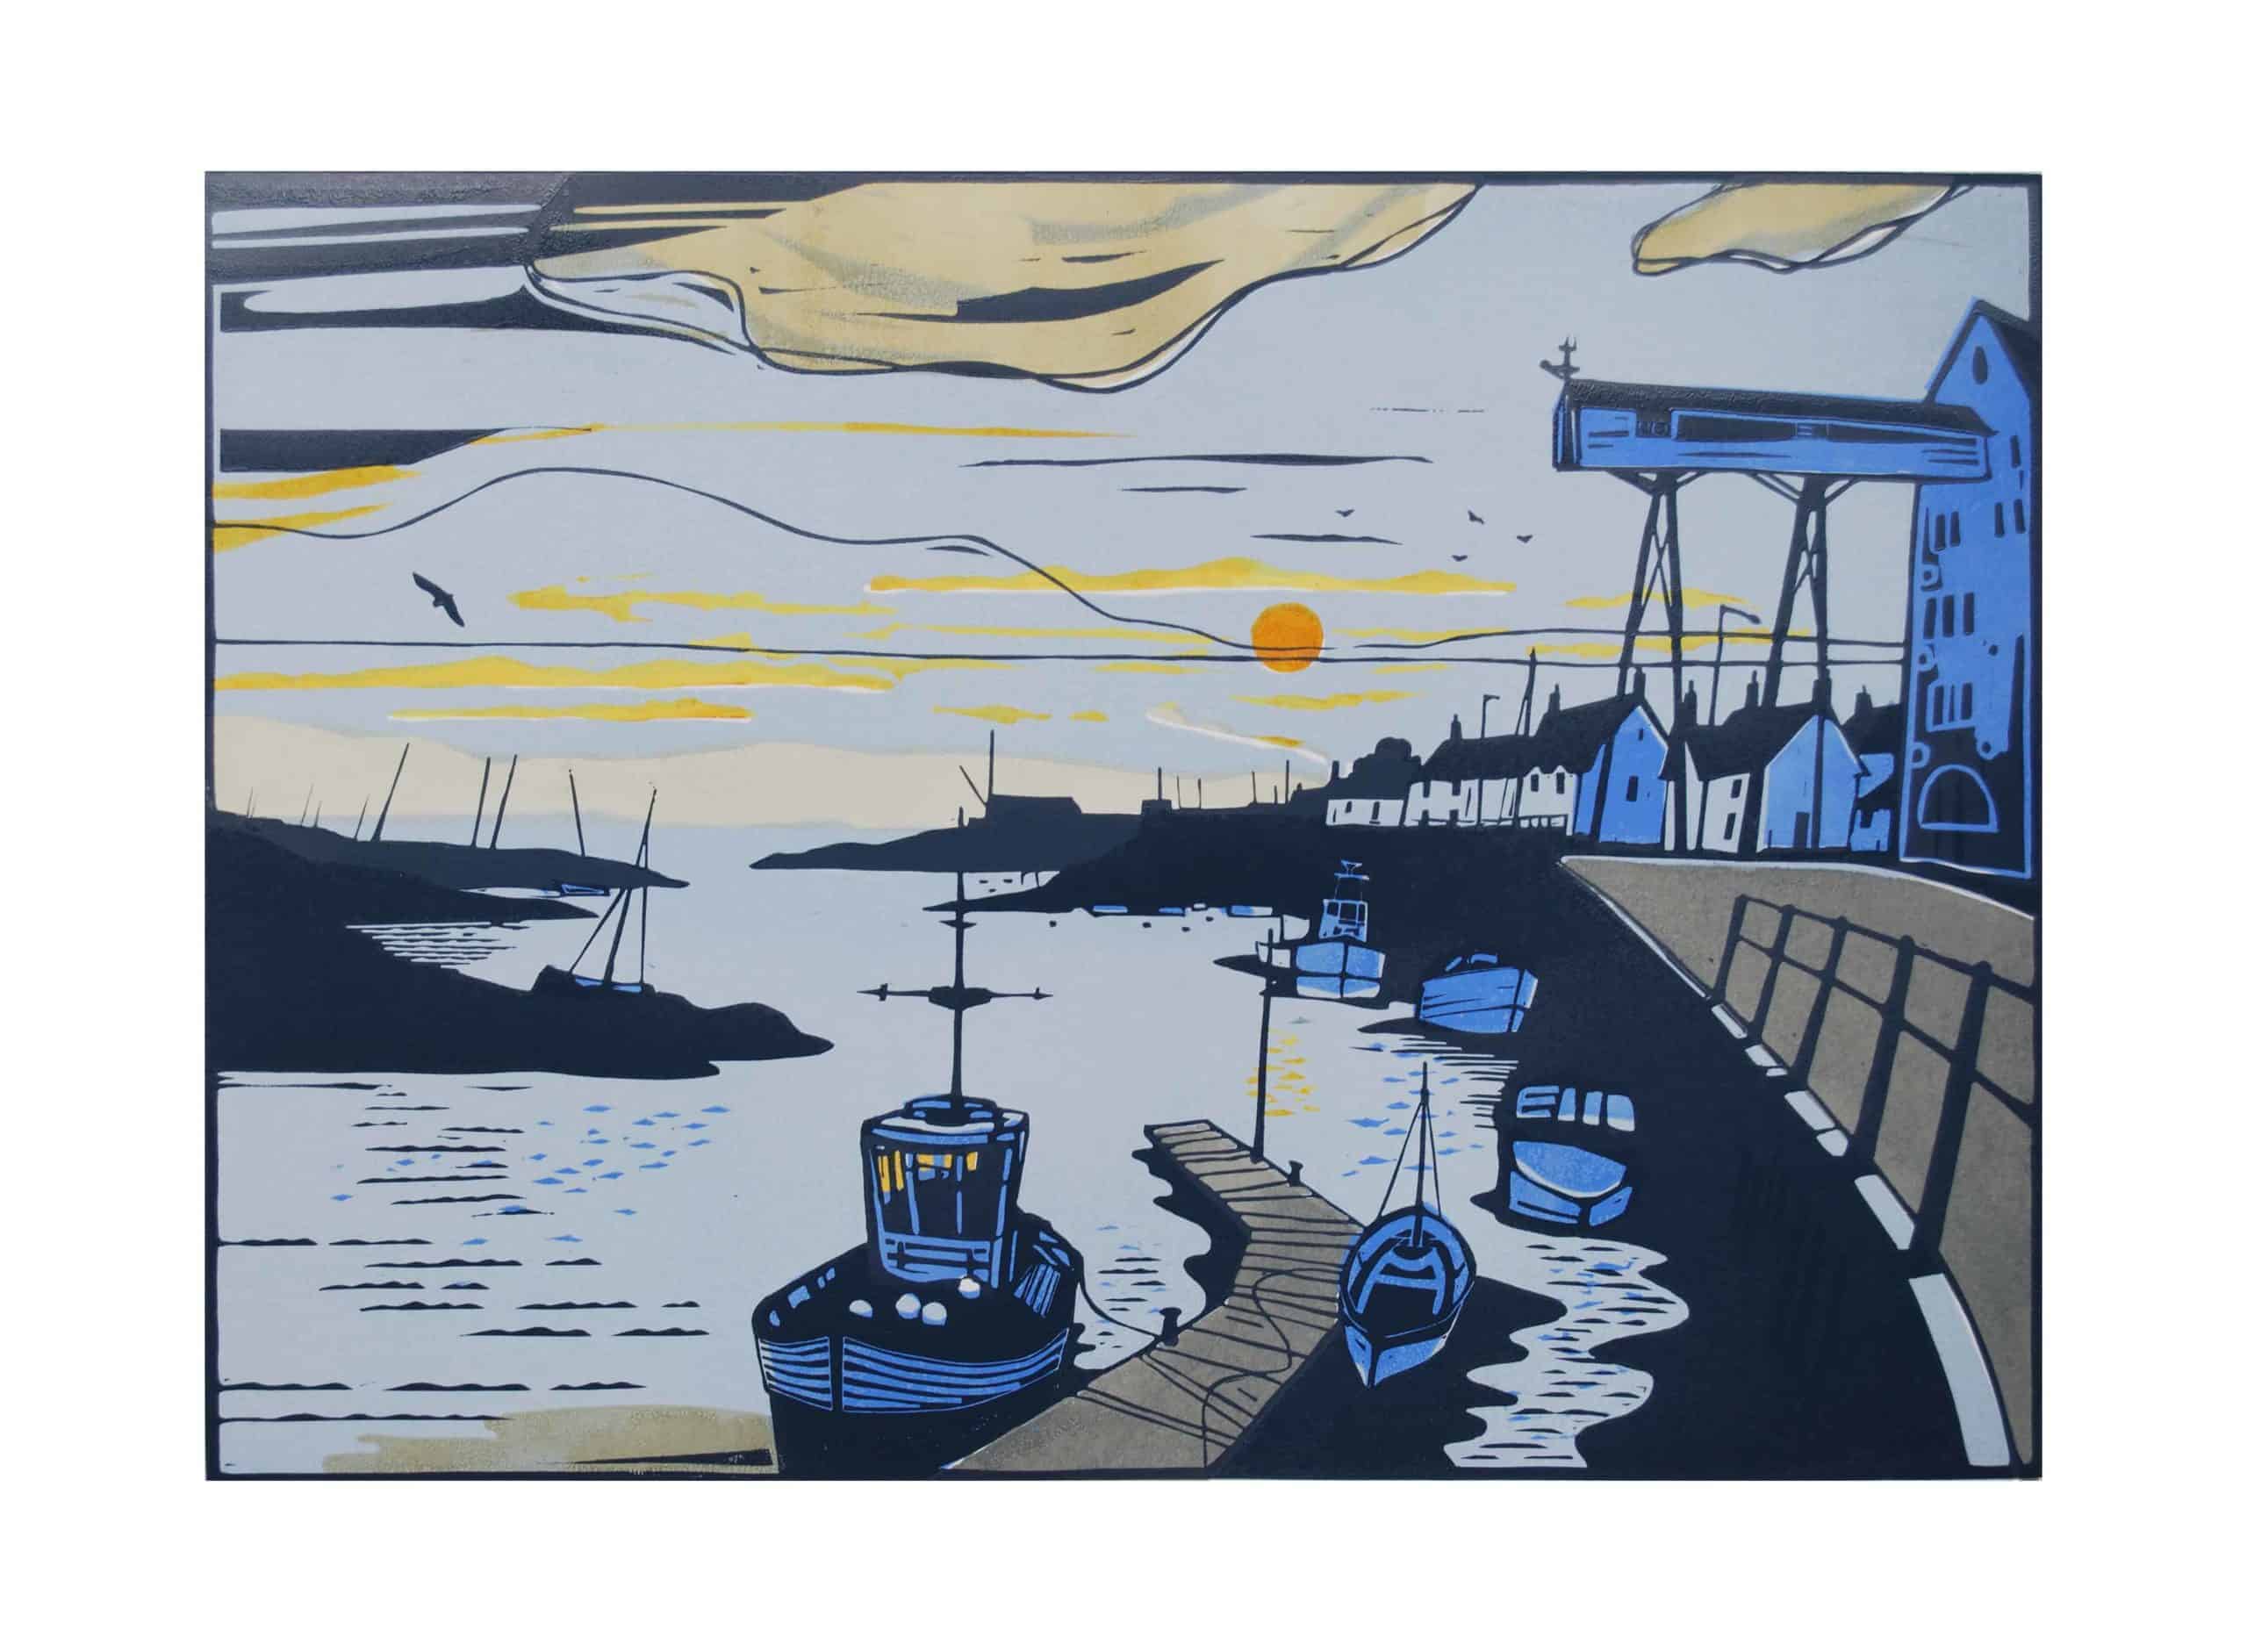 wells morning colin moore limited edition seascape linocut print